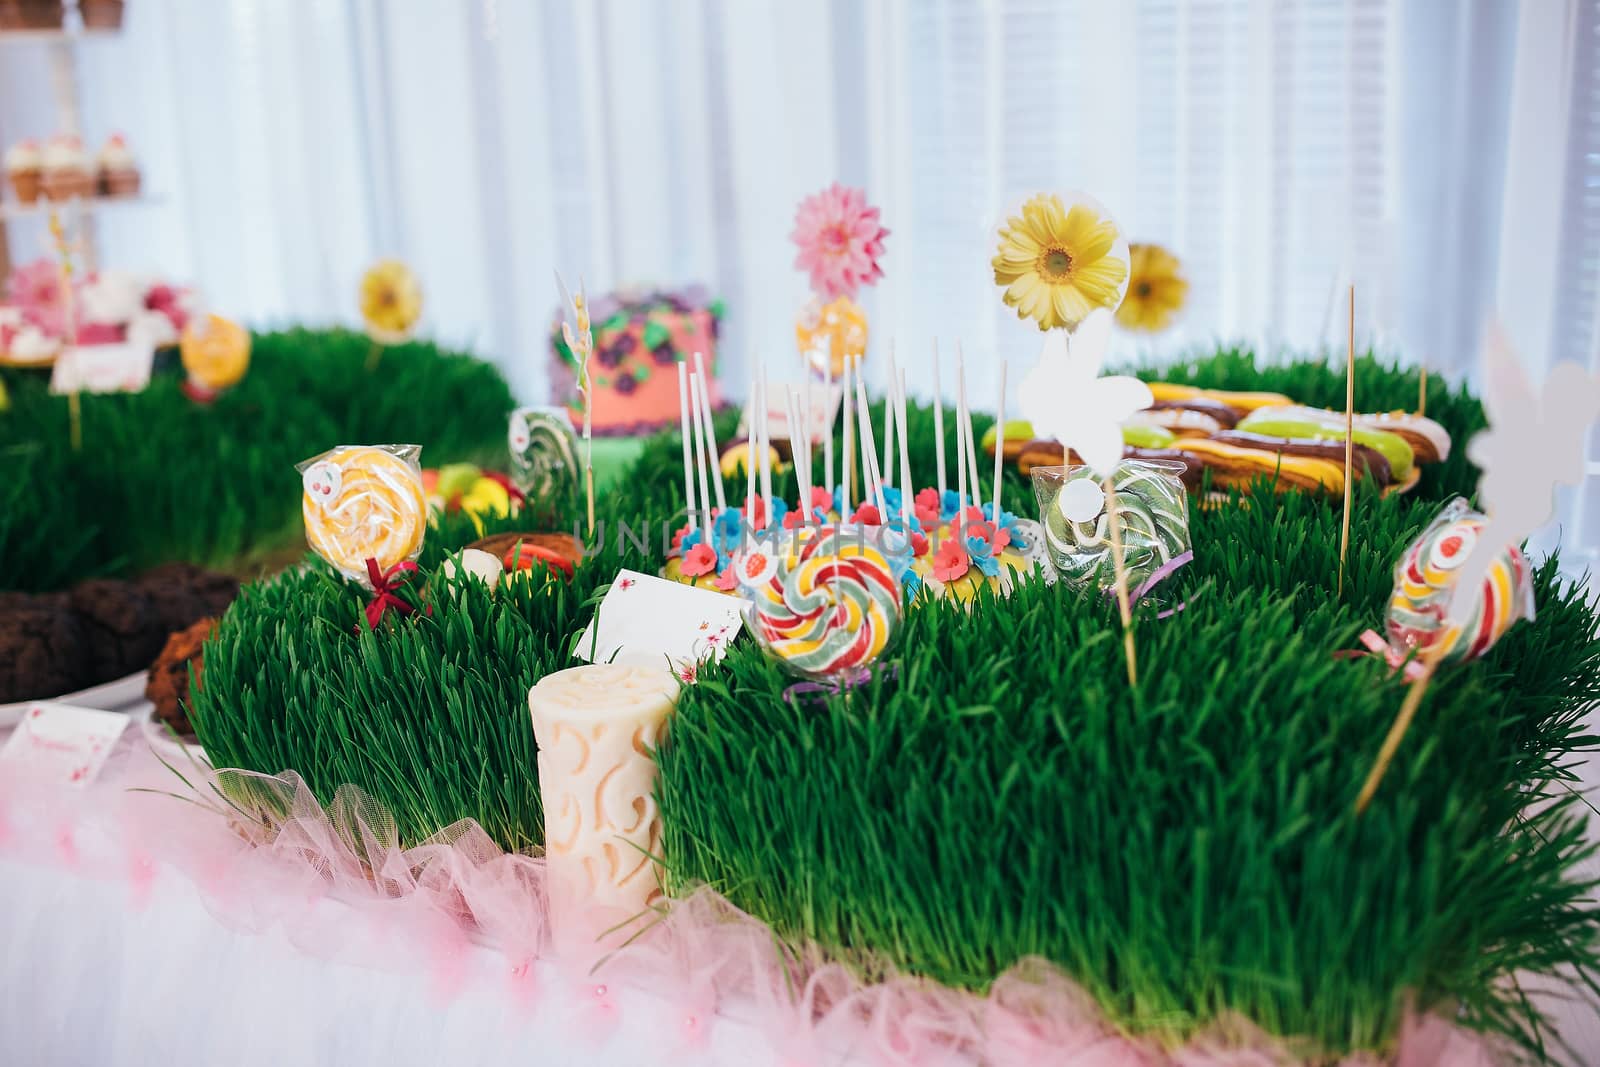 A table with a festive cake with mastic flowers and cookies. Kandy bar is decorated with grass on which cake and lollipops